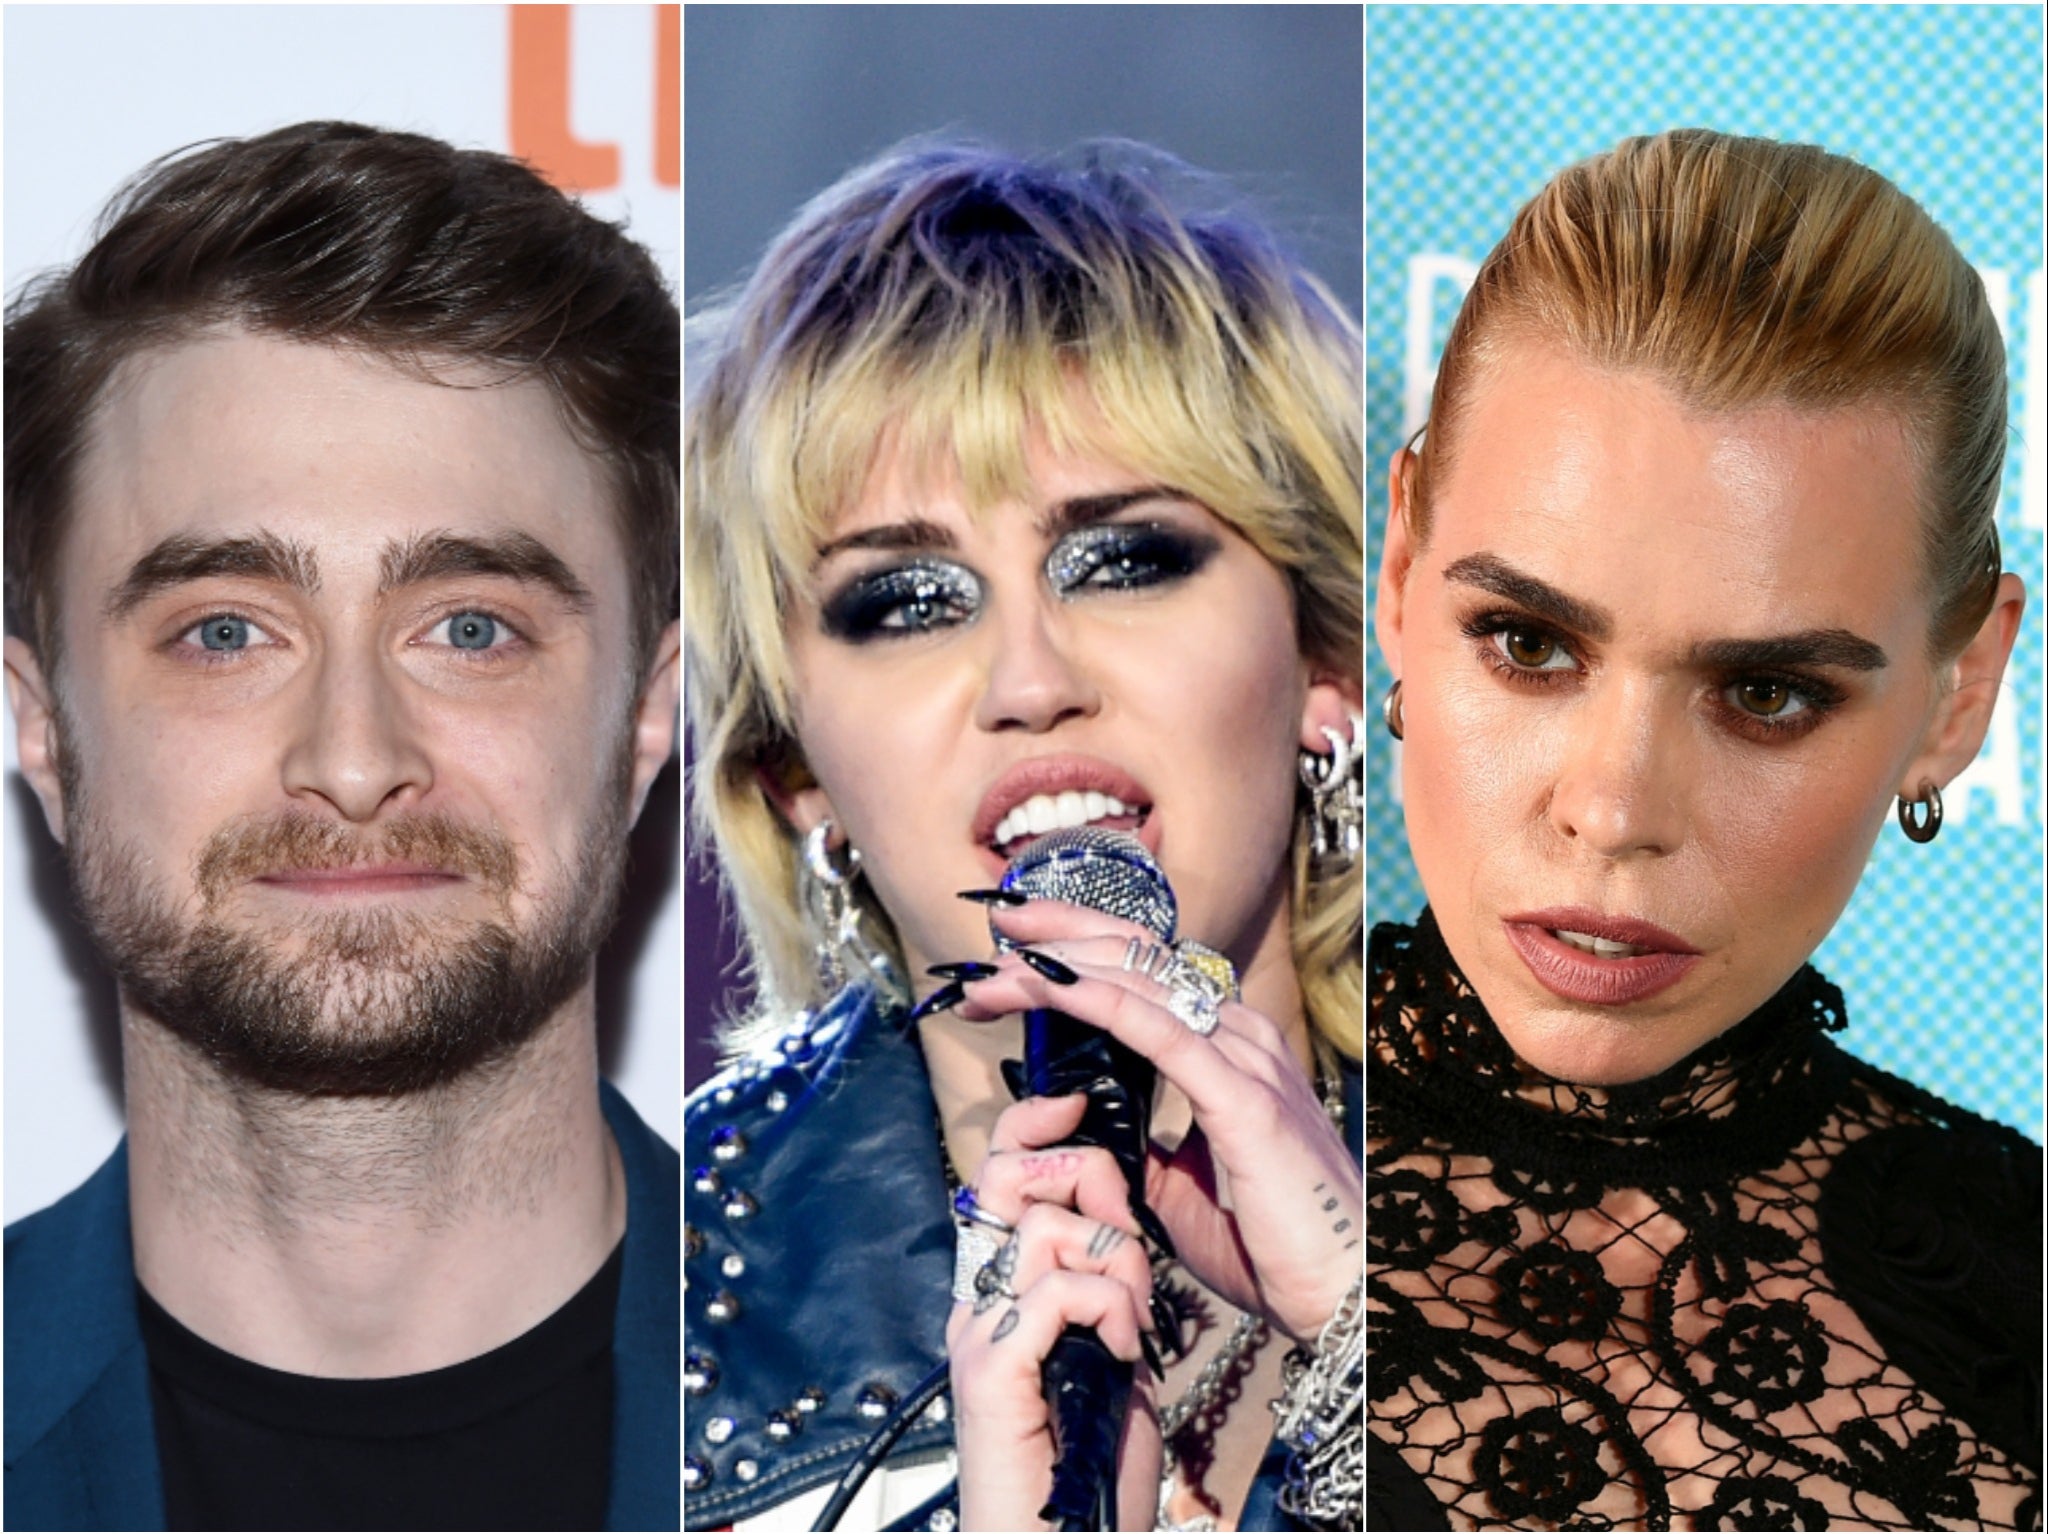 Daniel Radcliffe, Miley Cyrus and Billie Piper are three of the former child stars to have spoken publicly about their experiences